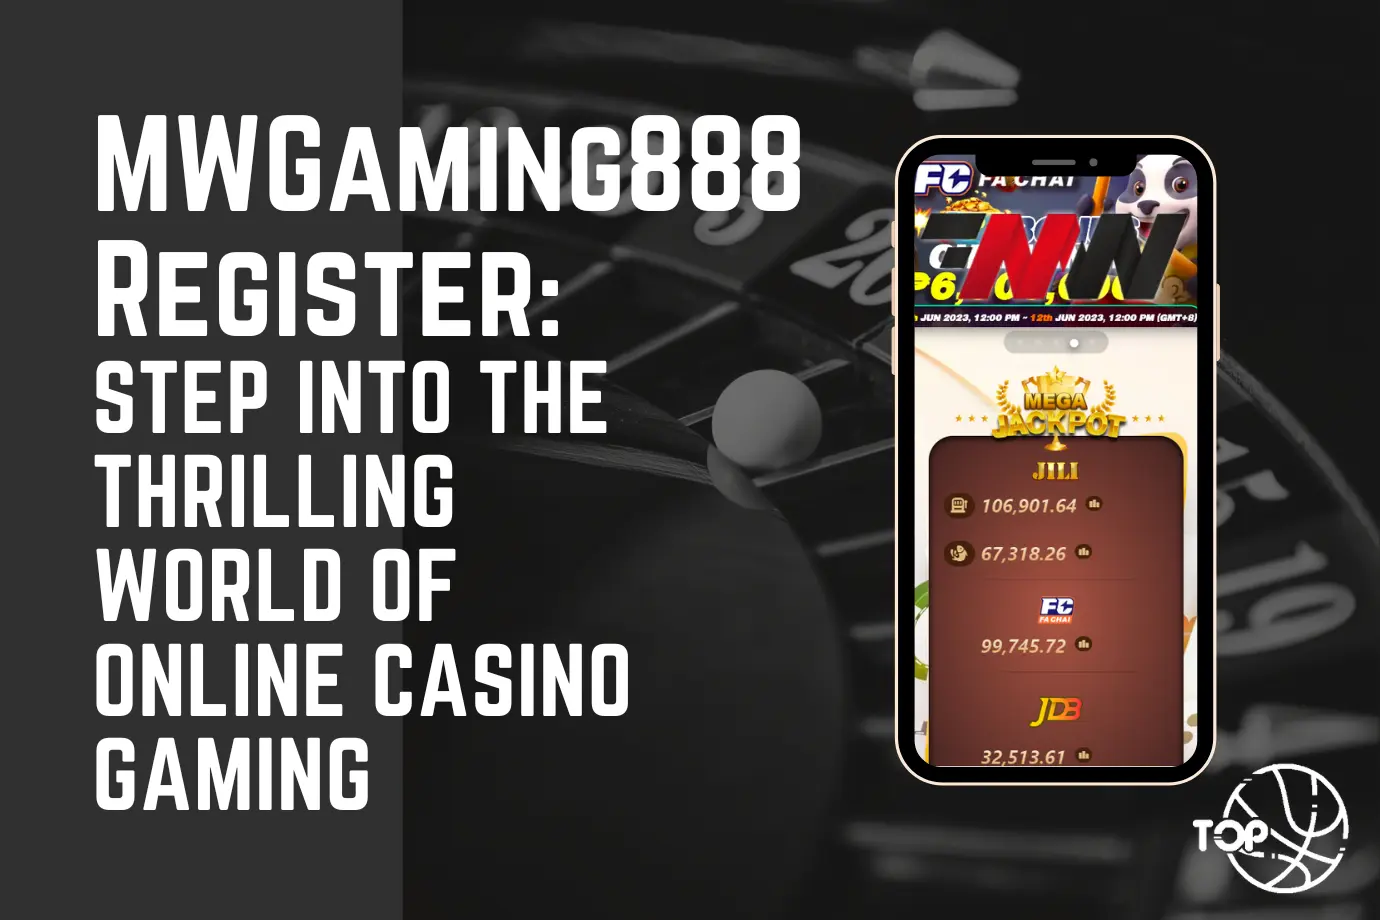 Step into the Thrilling World of MWGaming888: Registration Guide